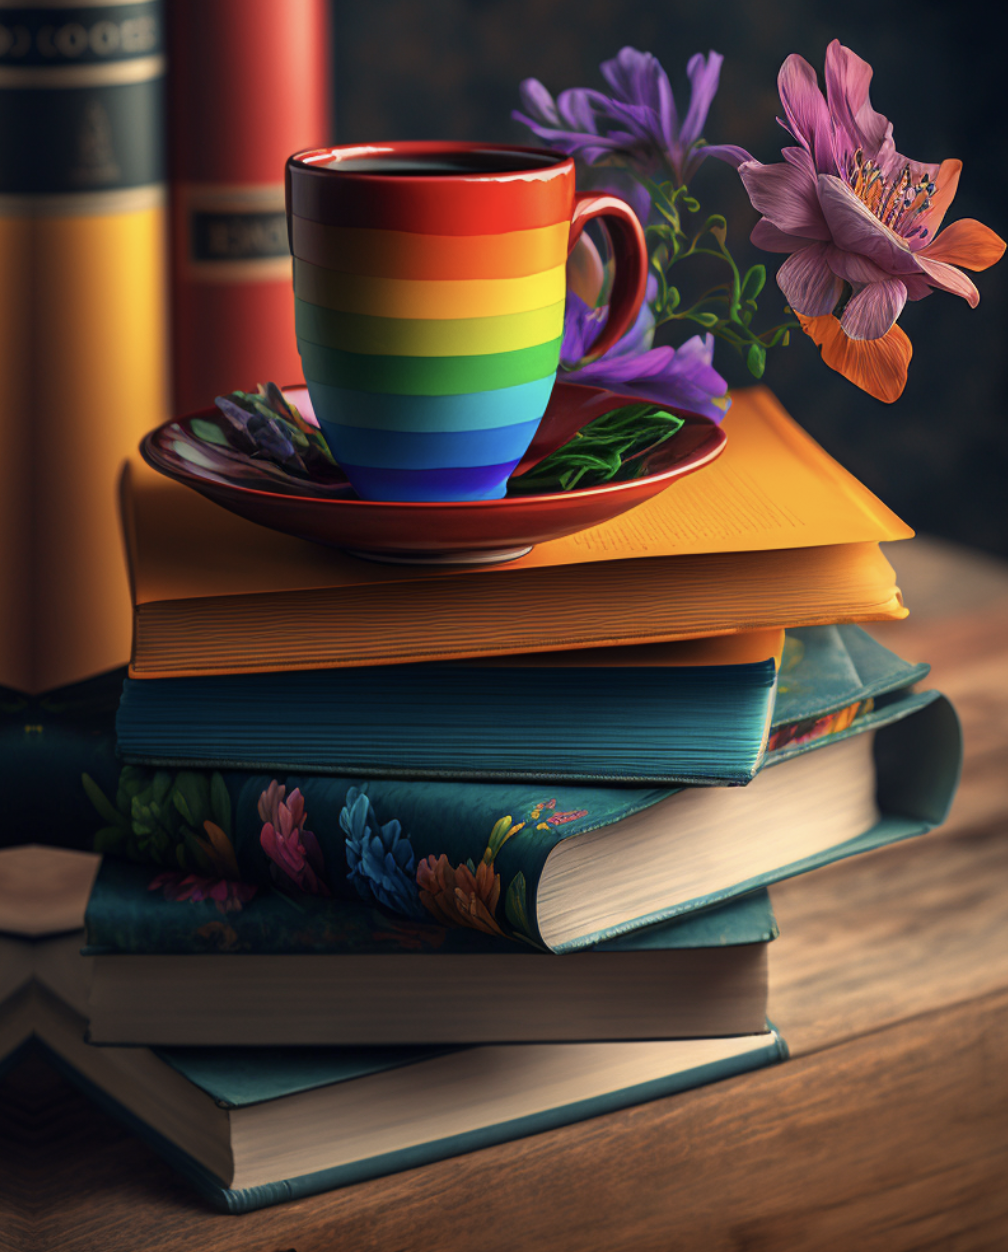 Coffee and Books, Please!